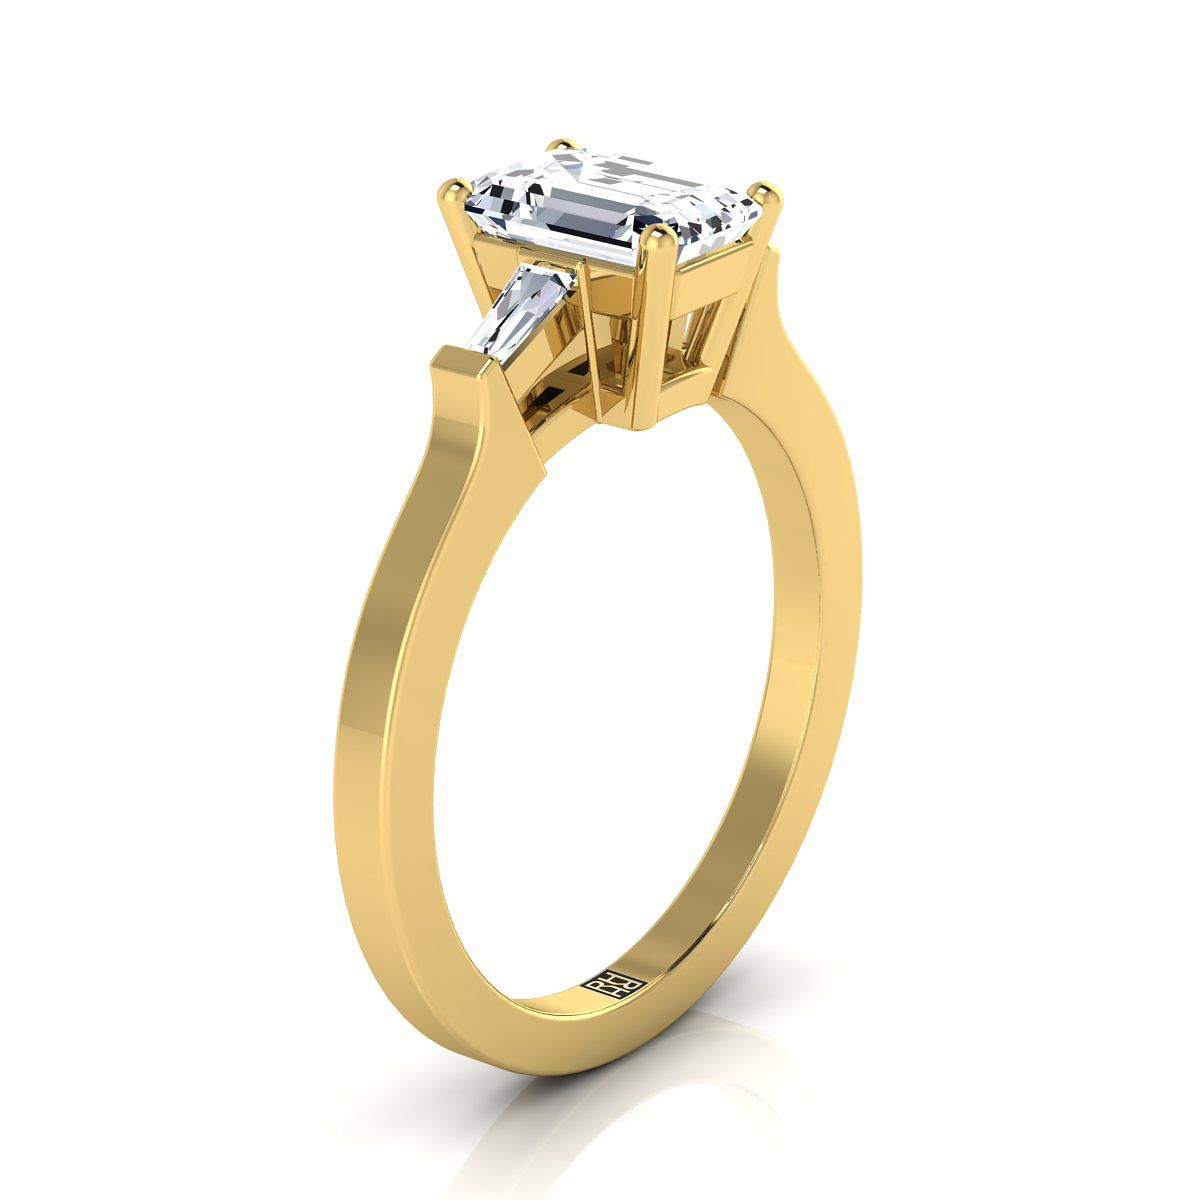 14K Yellow Gold Emerald Cut Diamond Tapered Baguette Accent Engagement Ring -1/4ctw